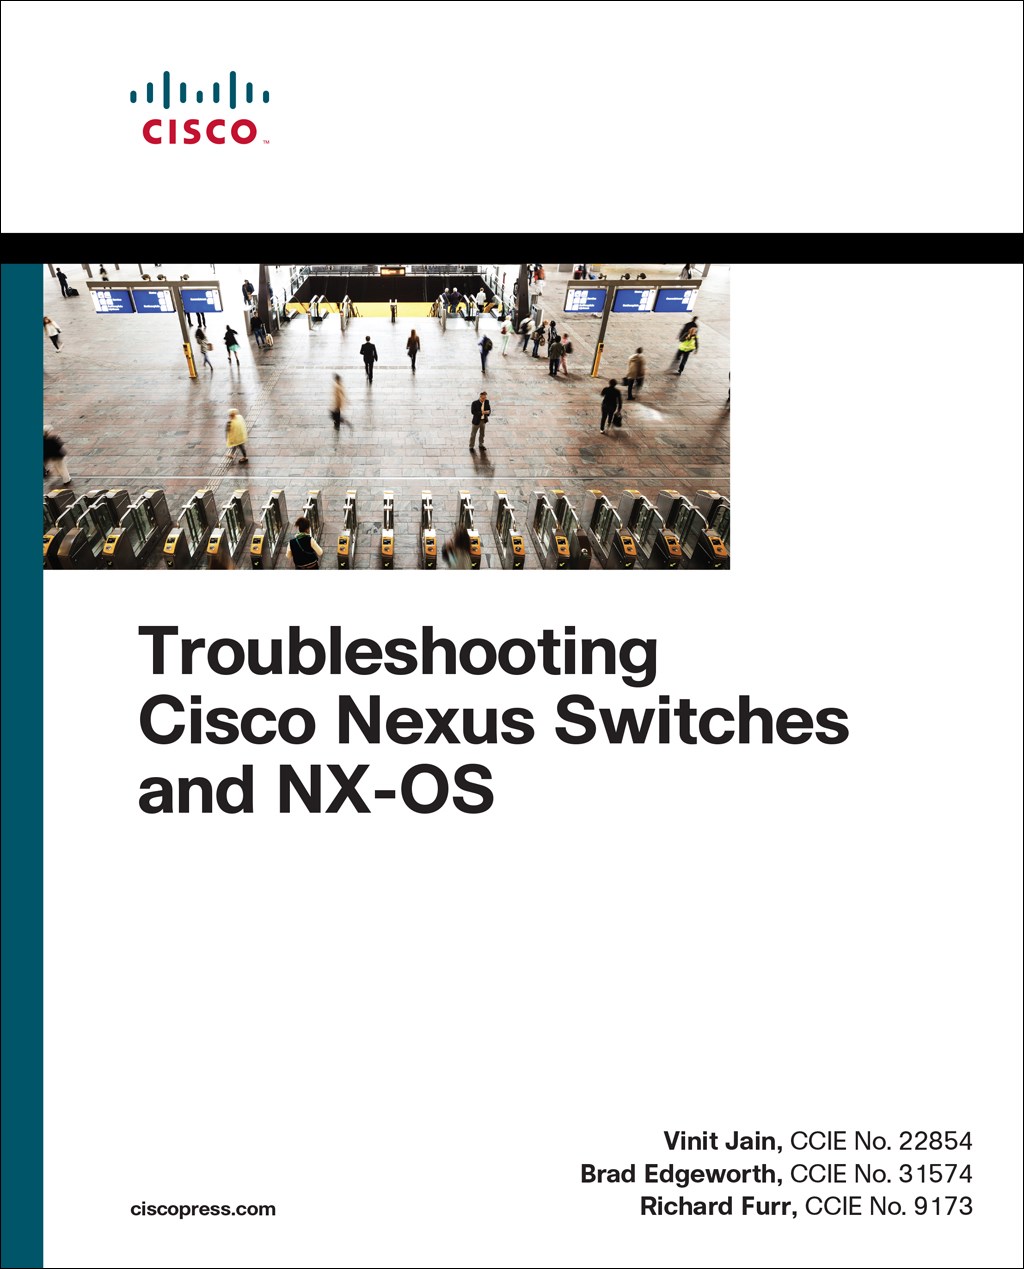 Troubleshooting Cisco Nexus Switches and NX-OS